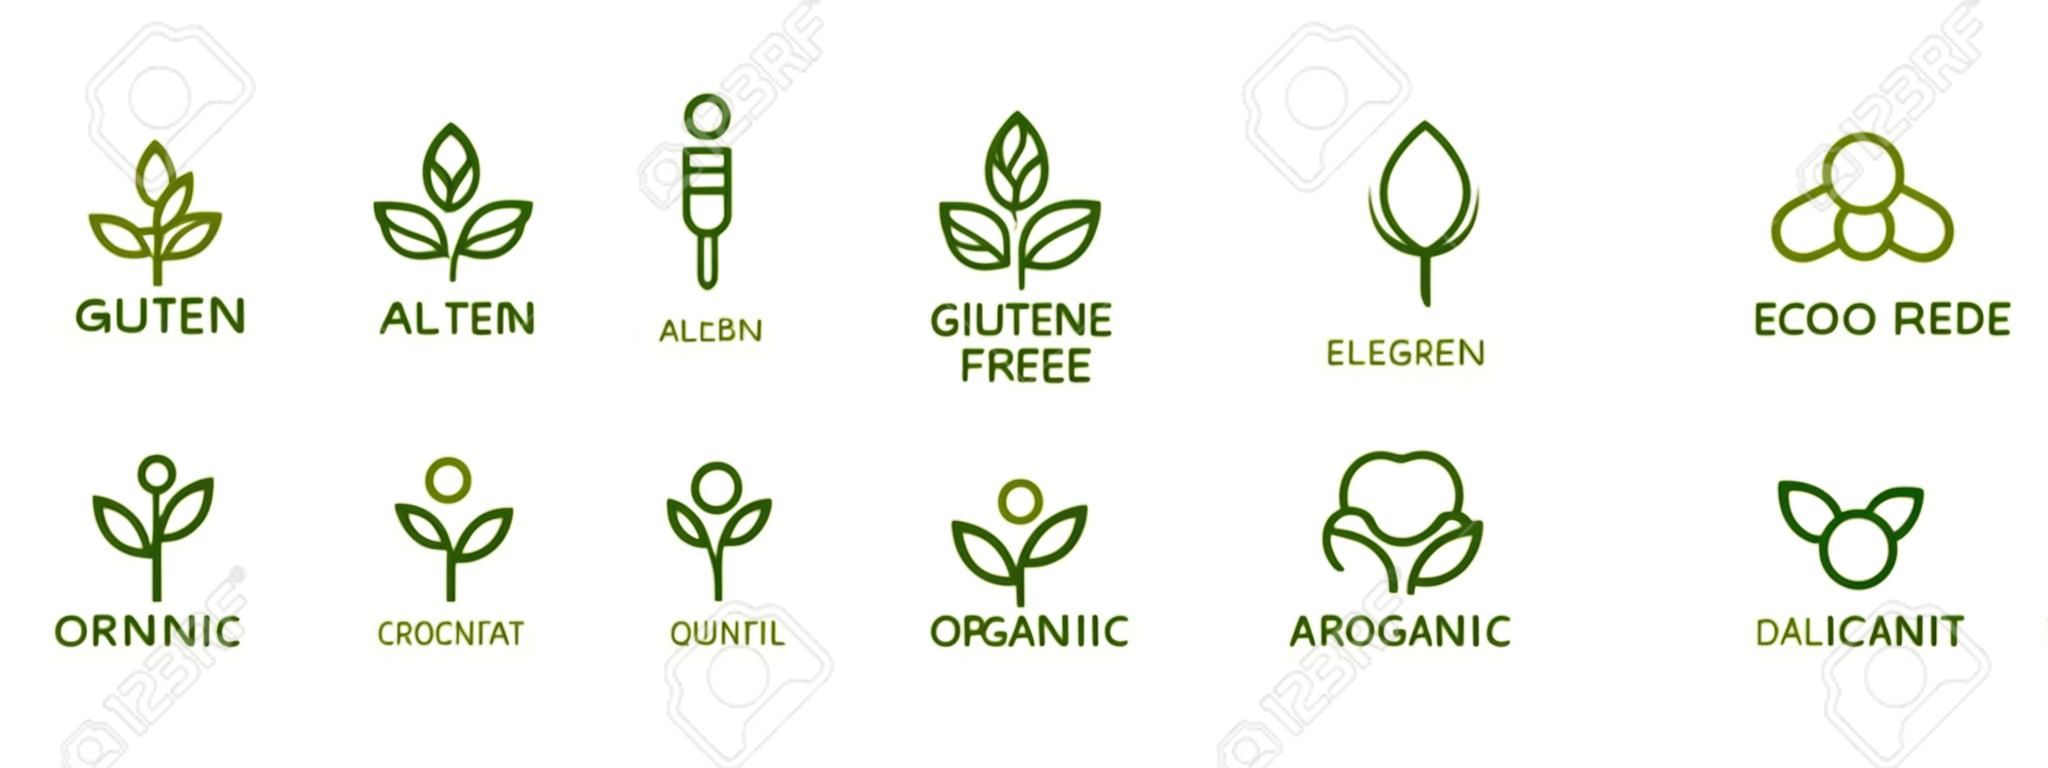 Organic and natural cosmetic line icons. Gluten and paraben free cosmetic. Allergen free badges. Non toxic logo. Skincare symbol. Beauty product. Eco, vegan label. Sensitive skin. Vector illustration